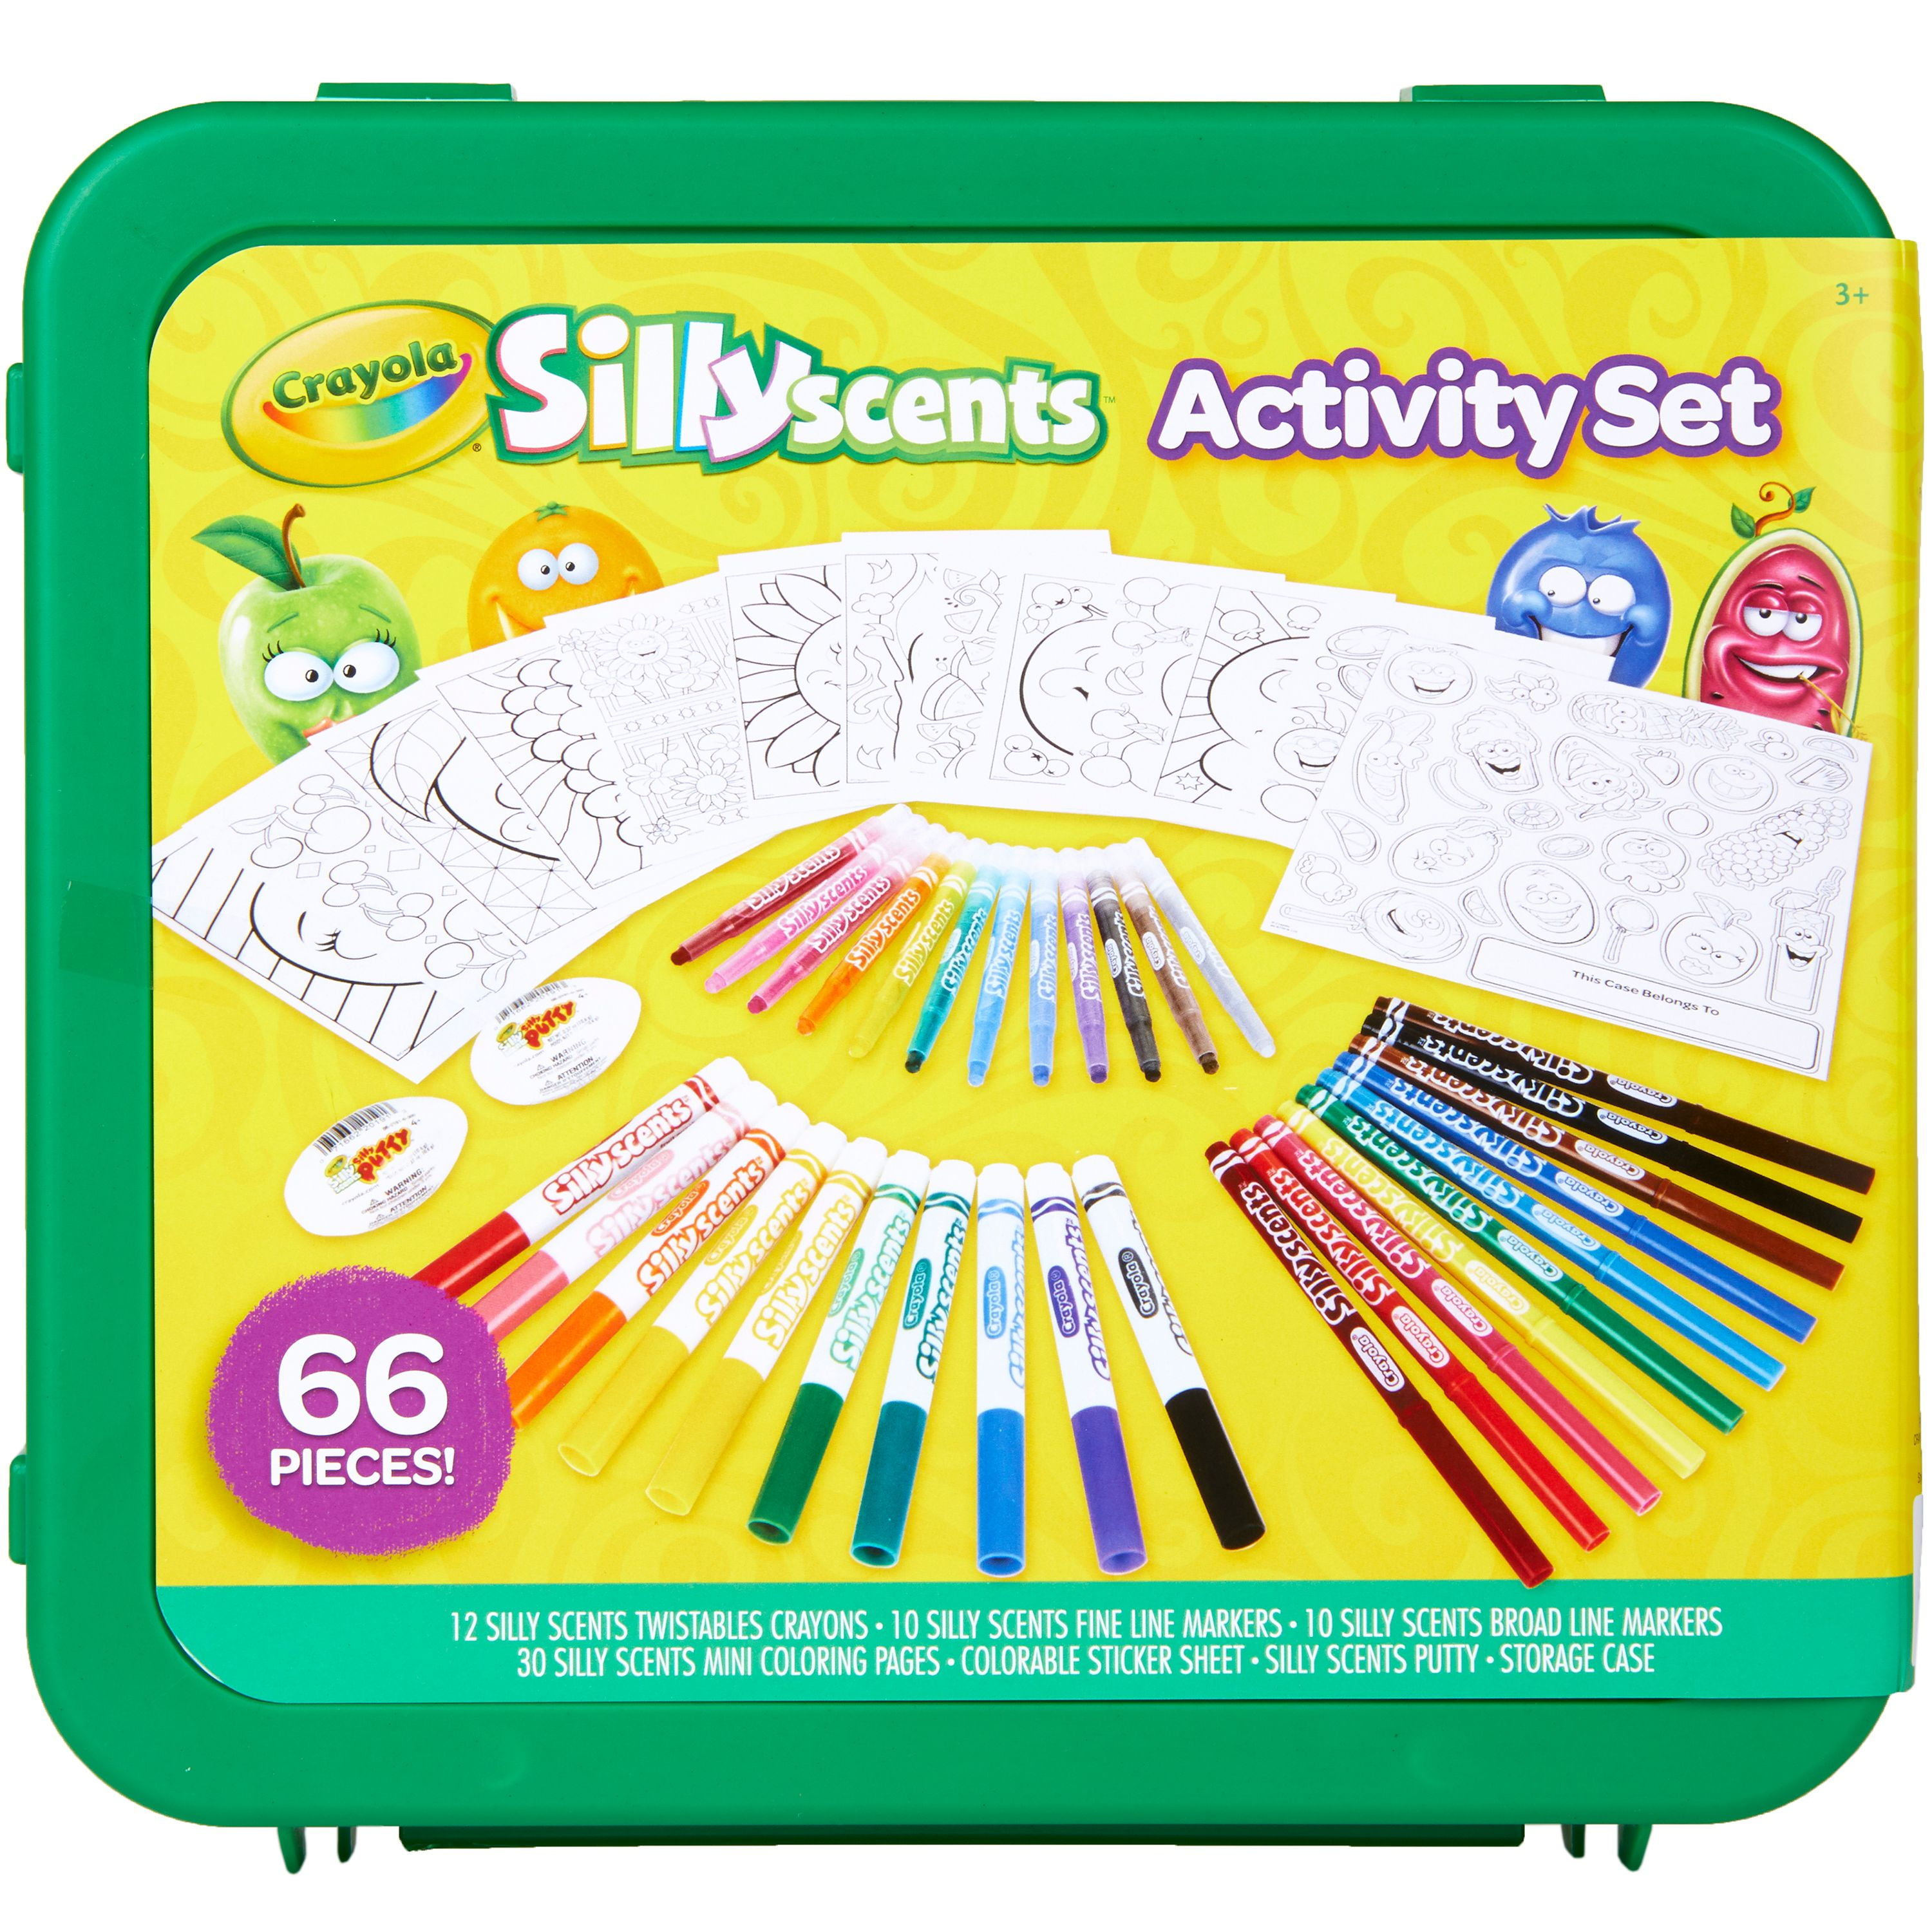  Crayola Color Caddy Craft Kit (90+ Pcs), Kids Coloring Set,  Gifts for Kids 4+, Includes Crayons, Markers, Colored Pencils, Glitter  Glue, Scissors, & Paper : Toys & Games